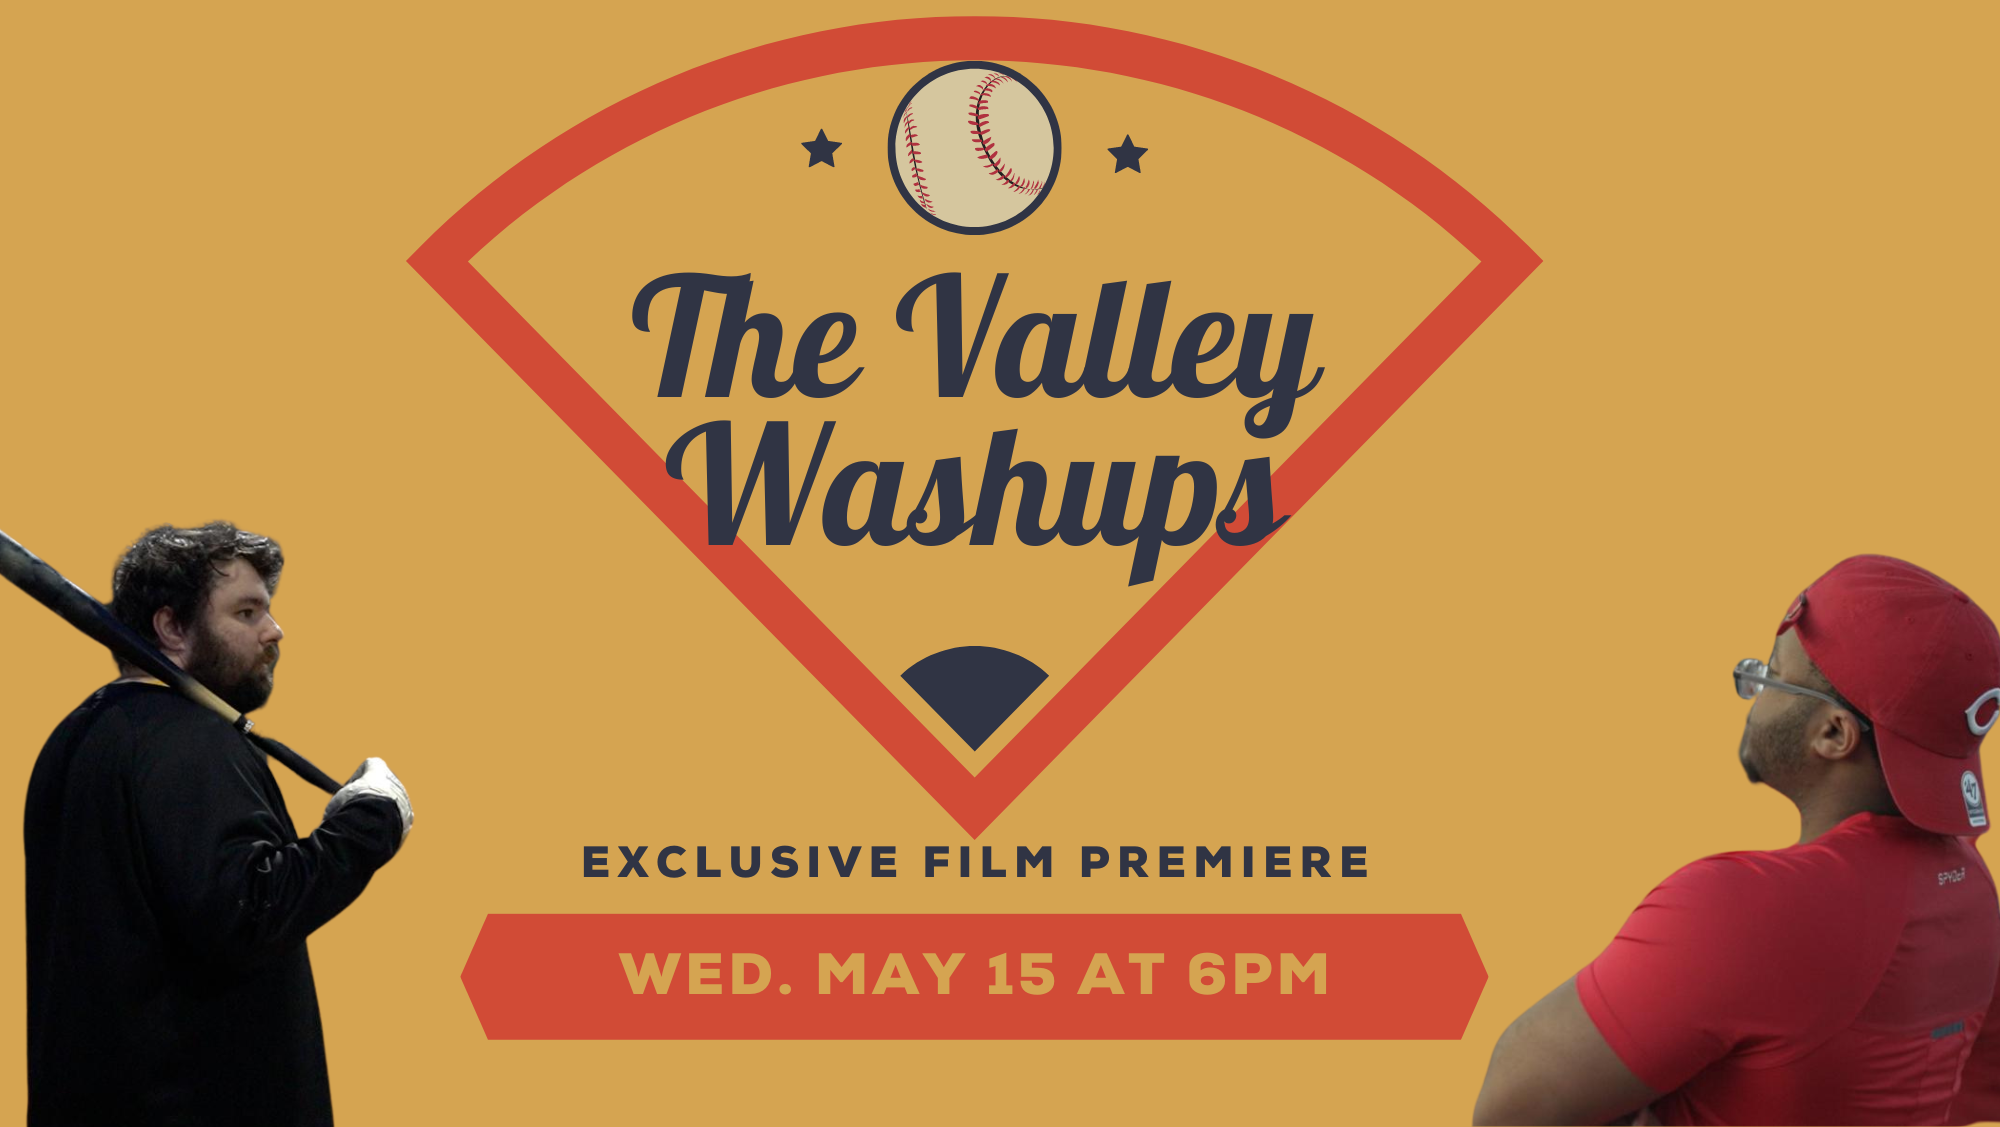 Film Premiere: "The Valley Washups"